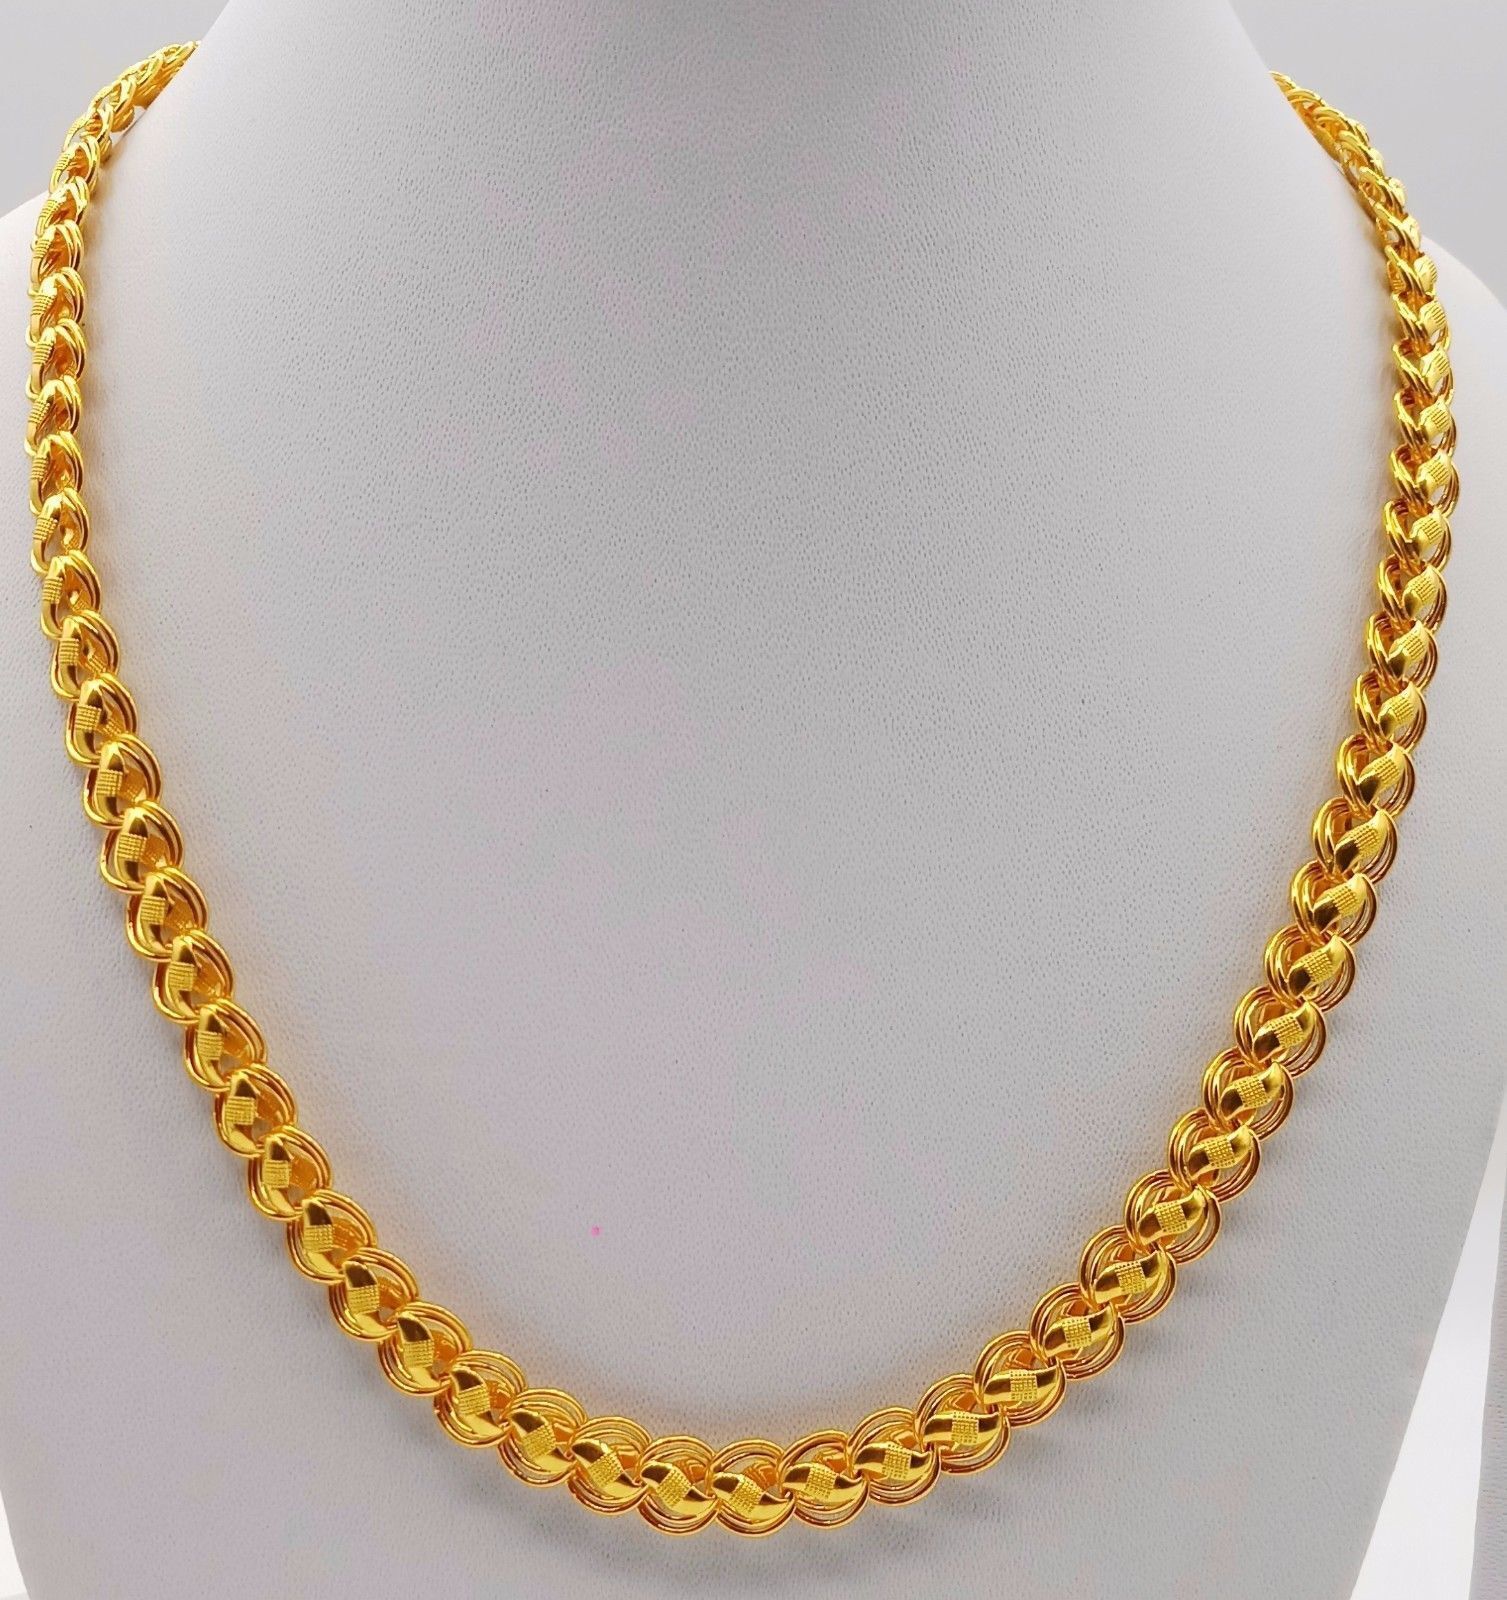 Primary image for 20" LONG MEN WOMEN UNISEX LOTUS DESIGN YELLOW 22kt GOLD LINK CHAIN NECKLACE 